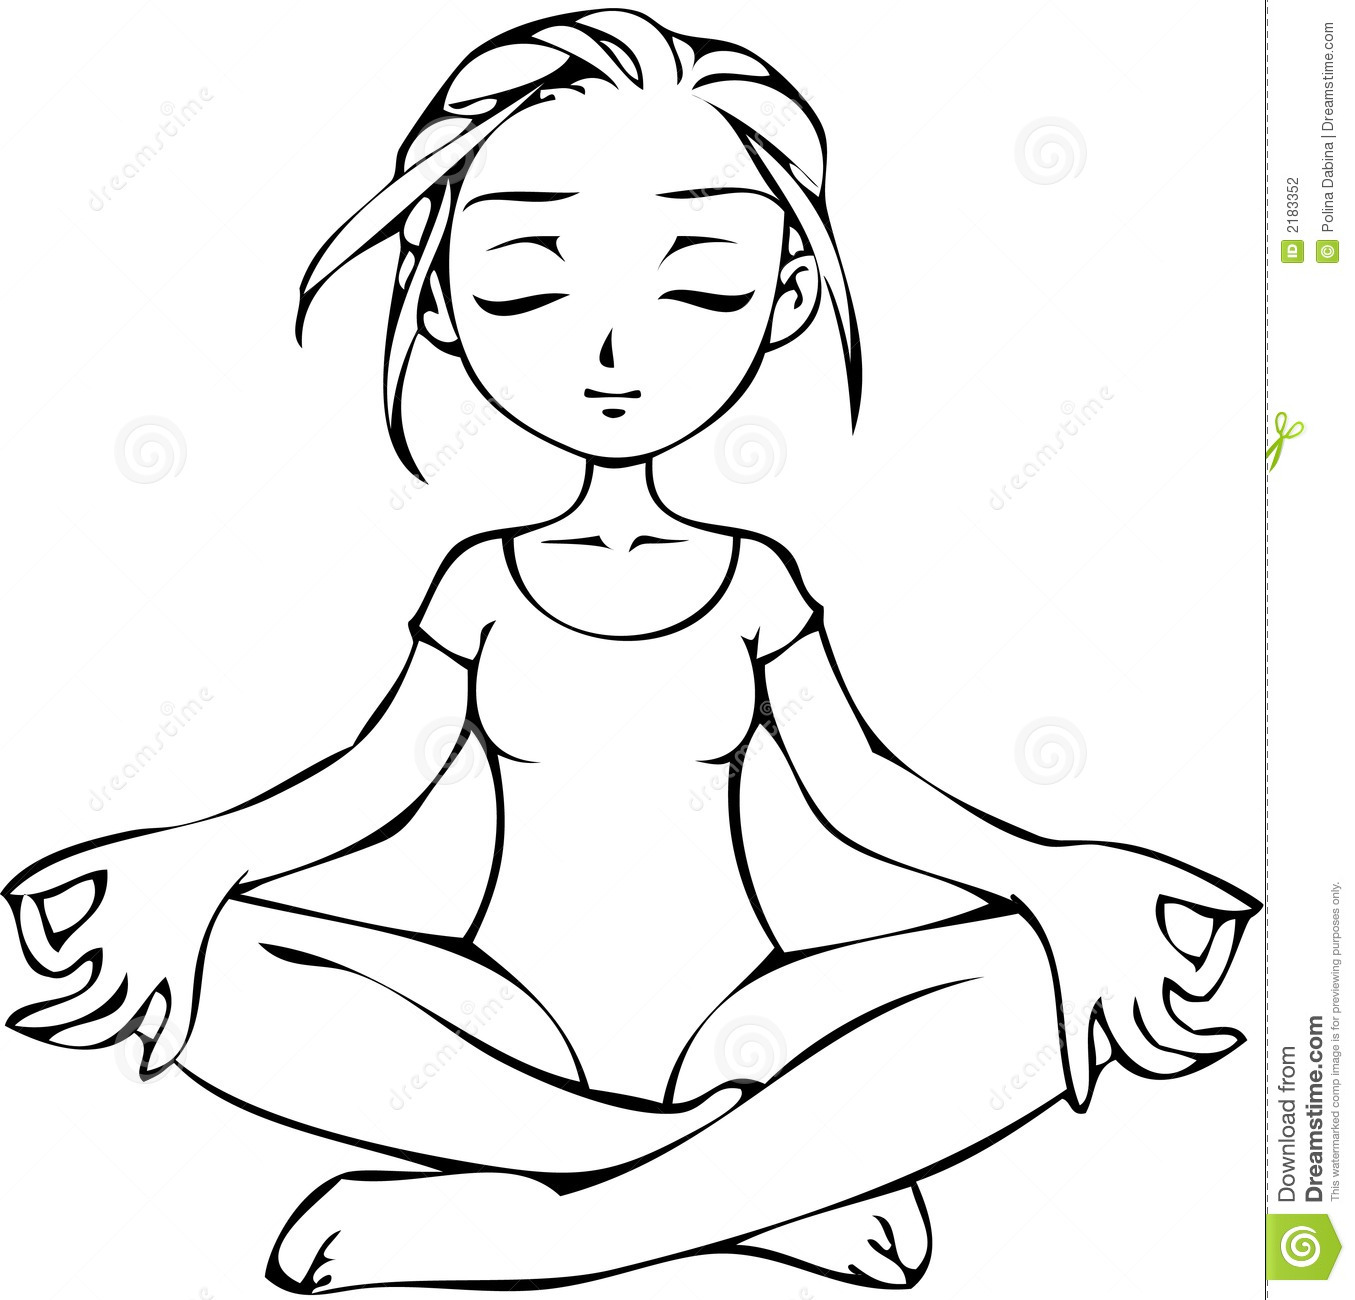 Girl In Yoga Meditation Position Stylized Black And White Vector